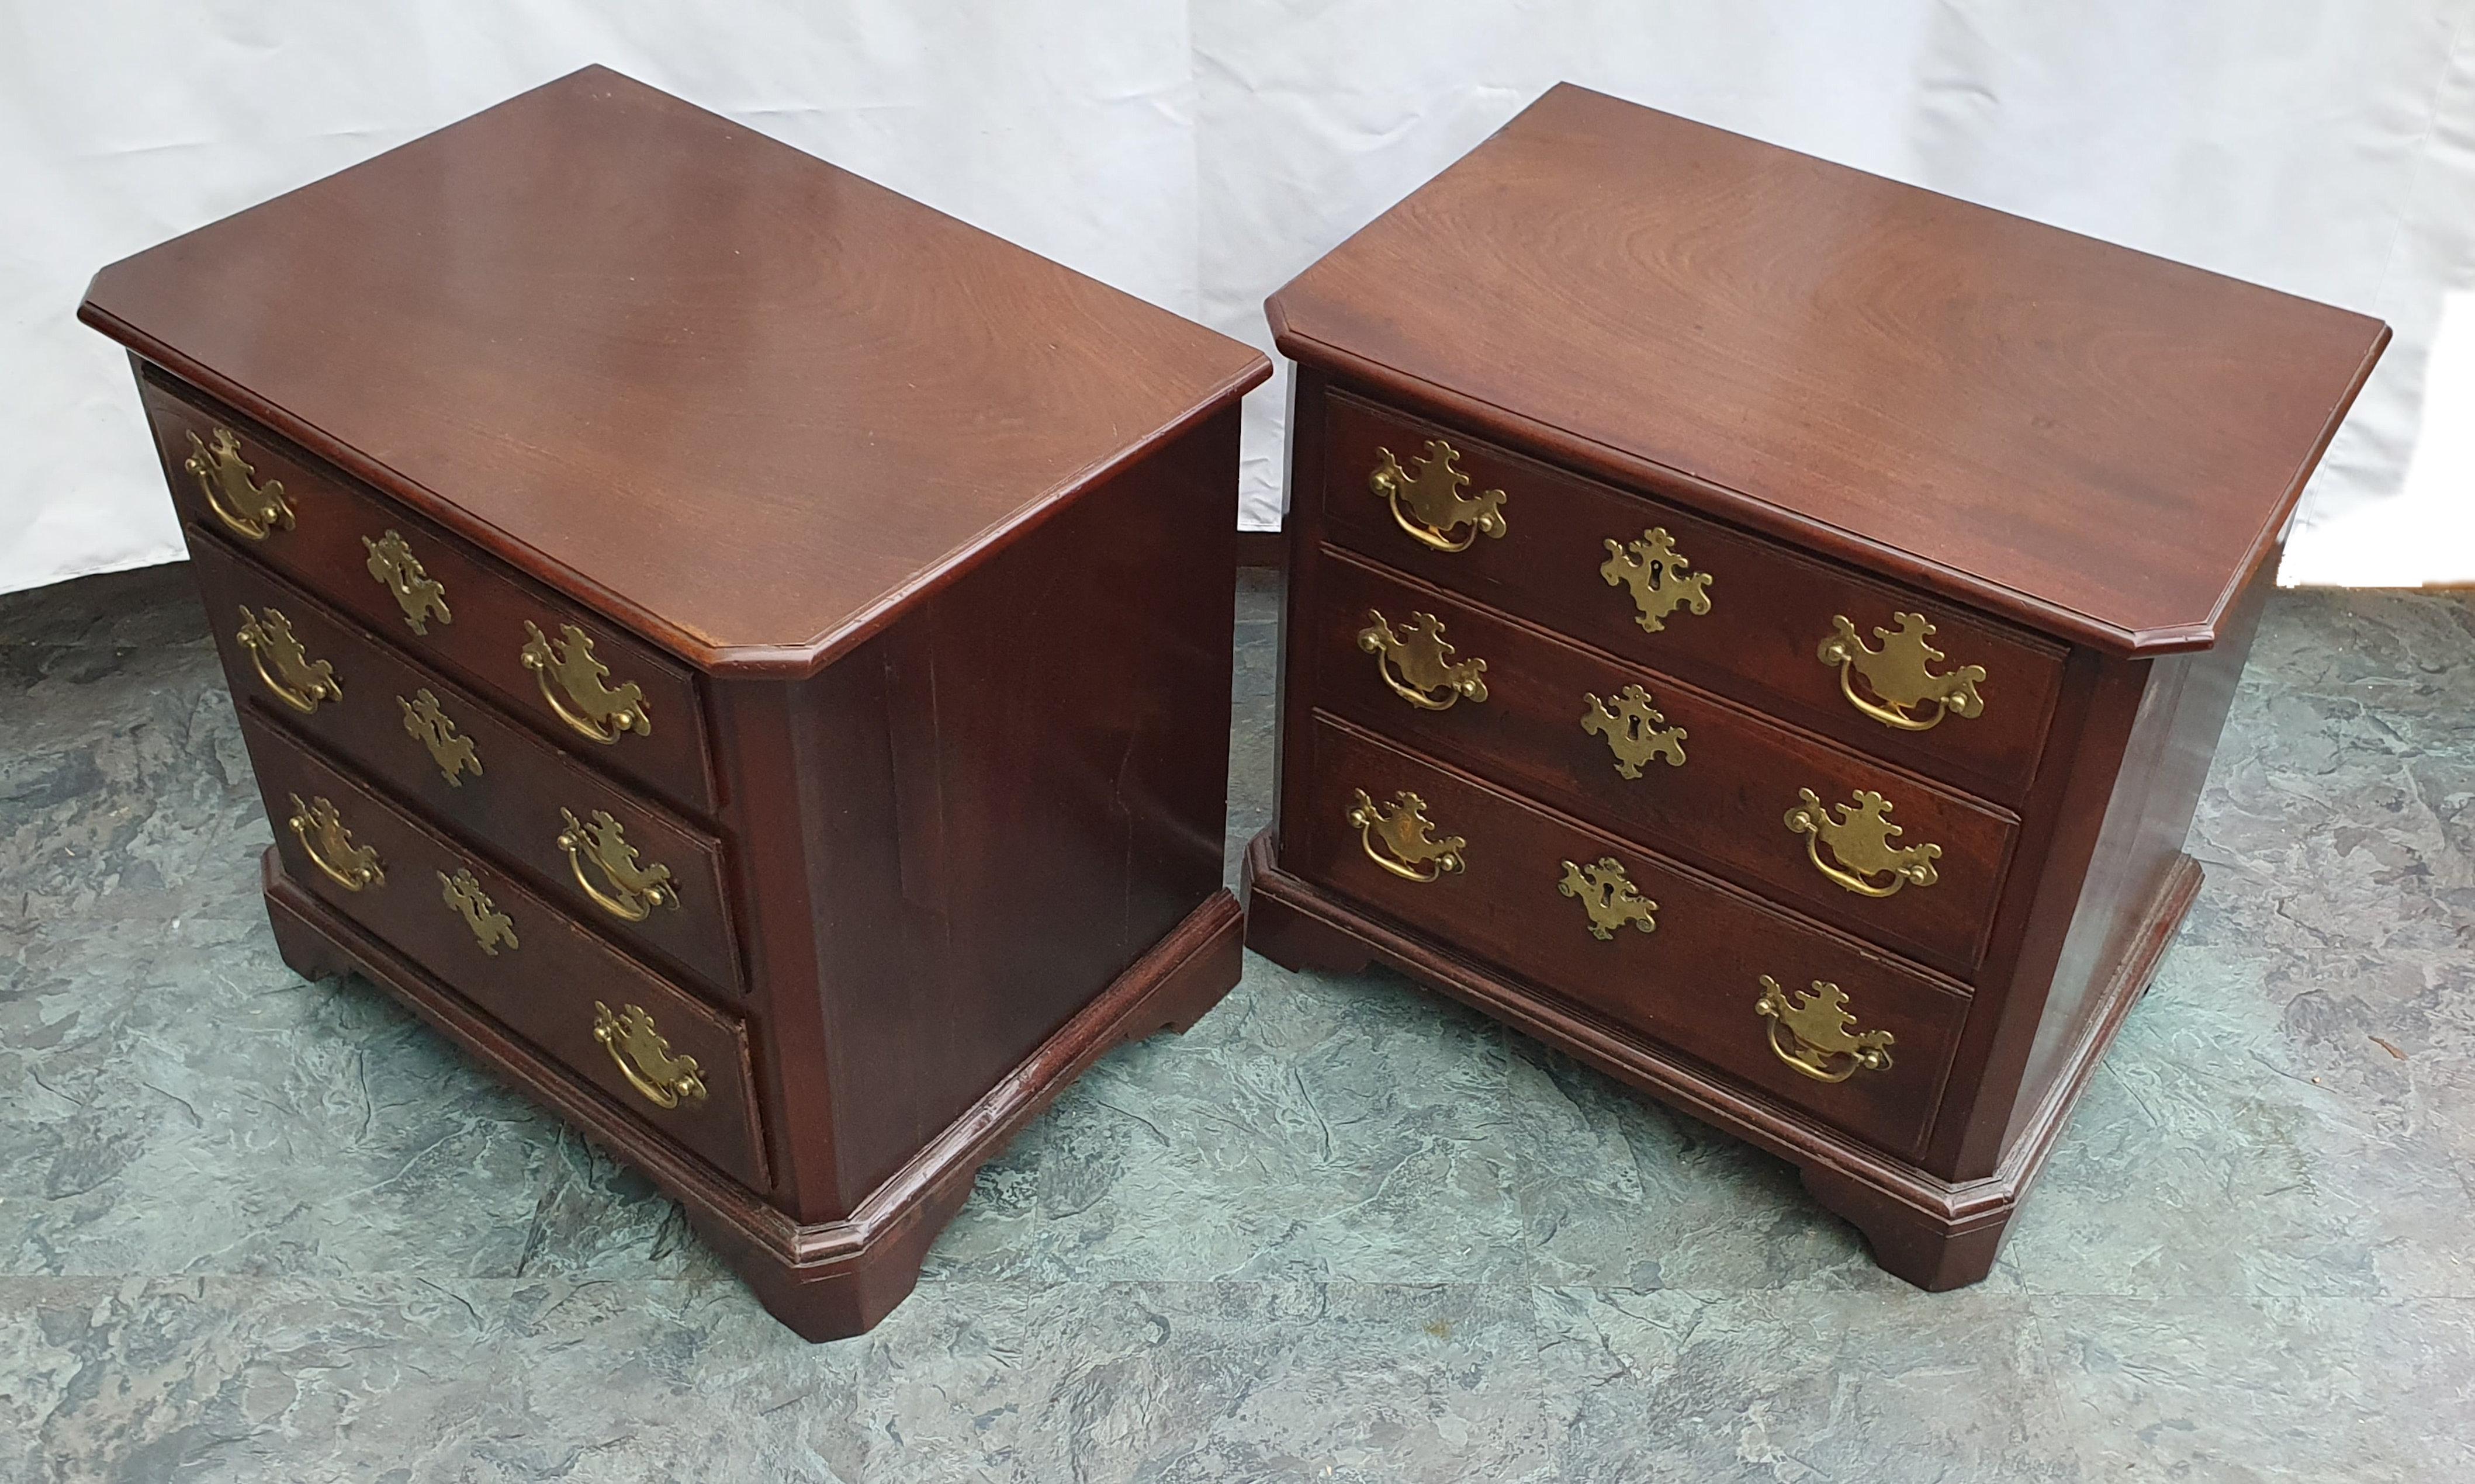 British Pair of 18th C. Mahogany Chests For Sale